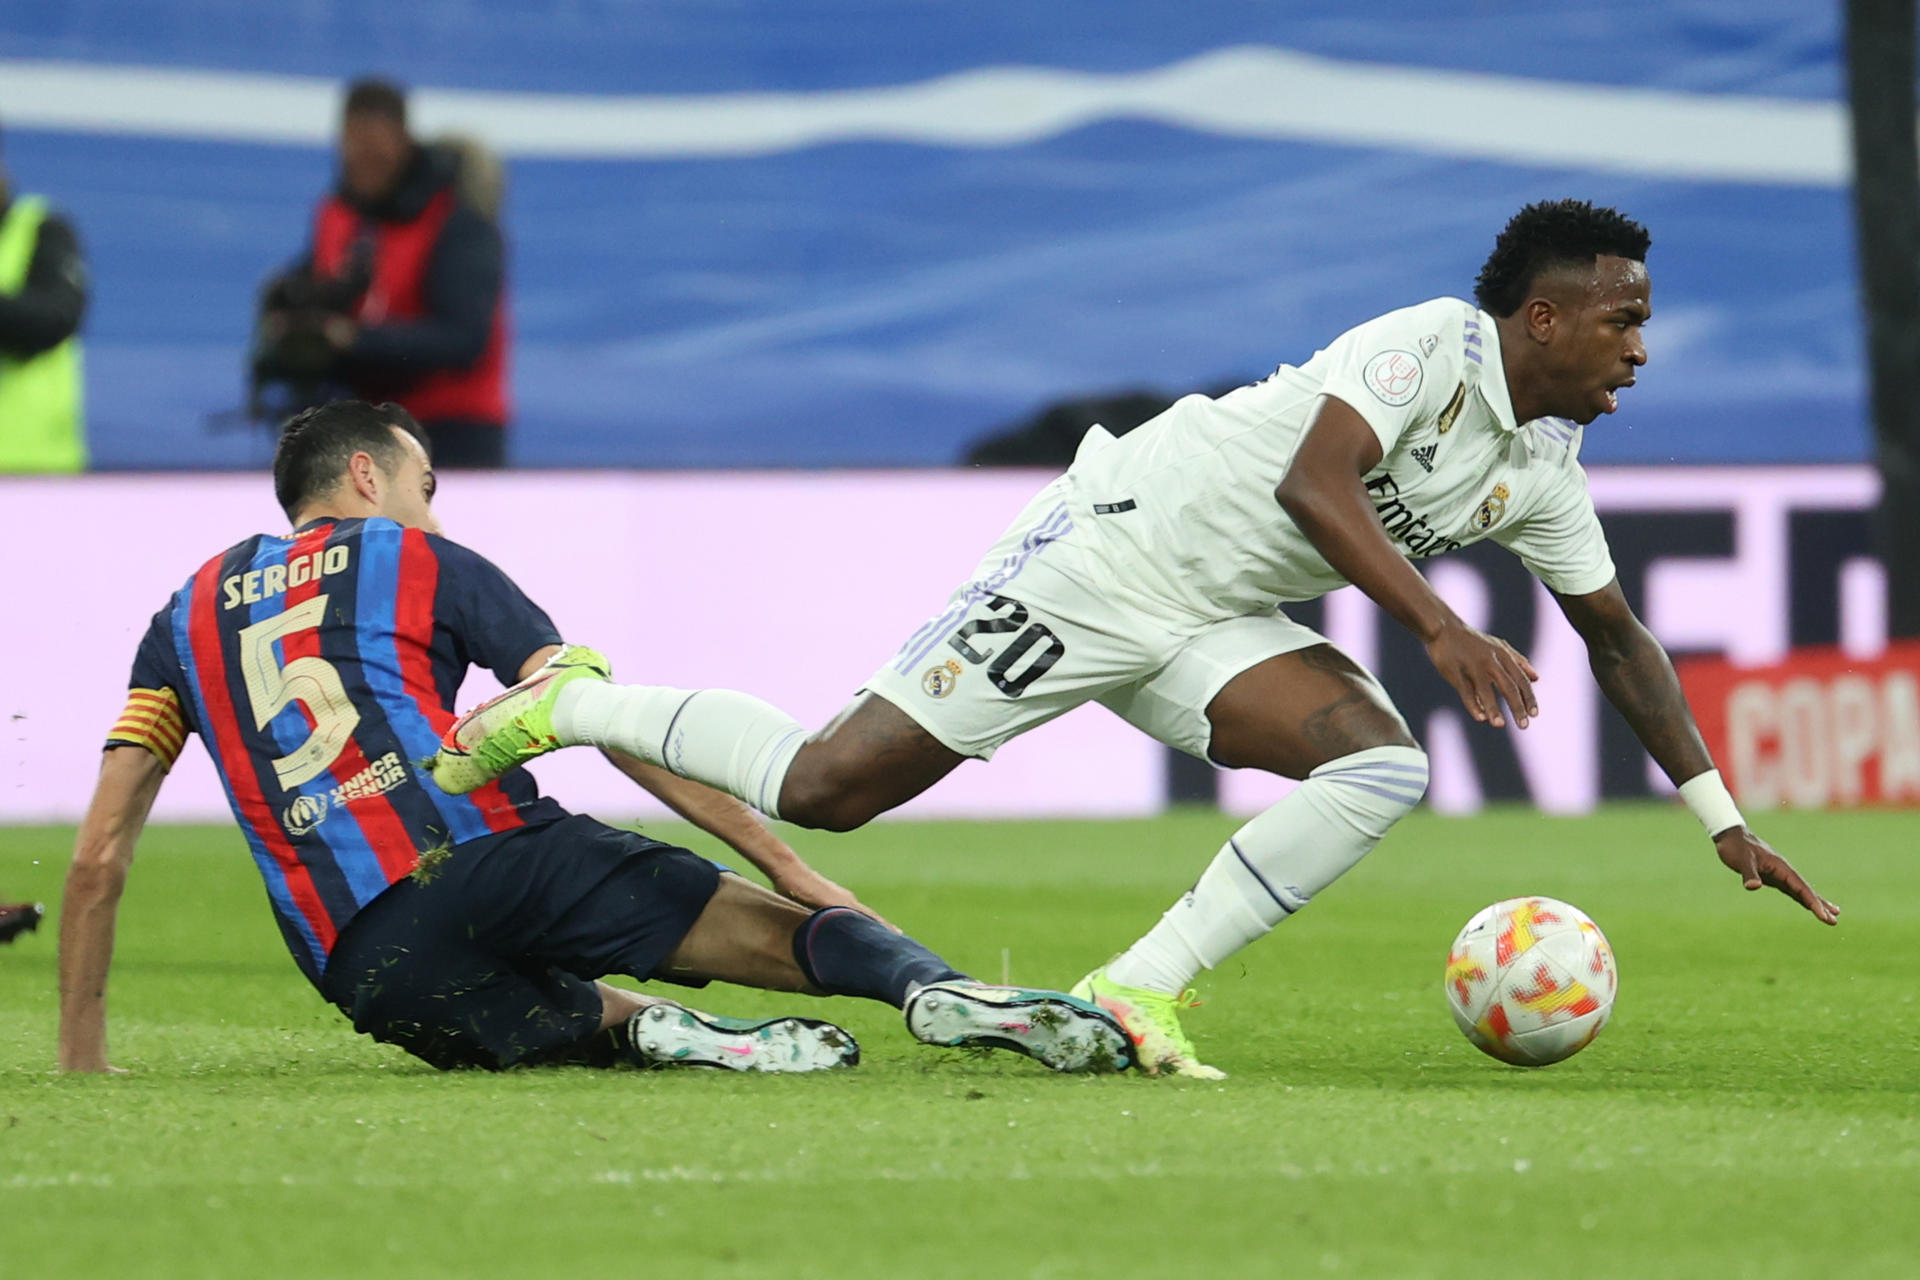 Real Madrid's Vinicius Jr. (R) tries to get past Sergio Busquets of FC Barcelona during the Copa del Rey semifinal first leg at the Santiago Bernabeu in Madrid on 2 March 2023. EFE/Juanjo Martin